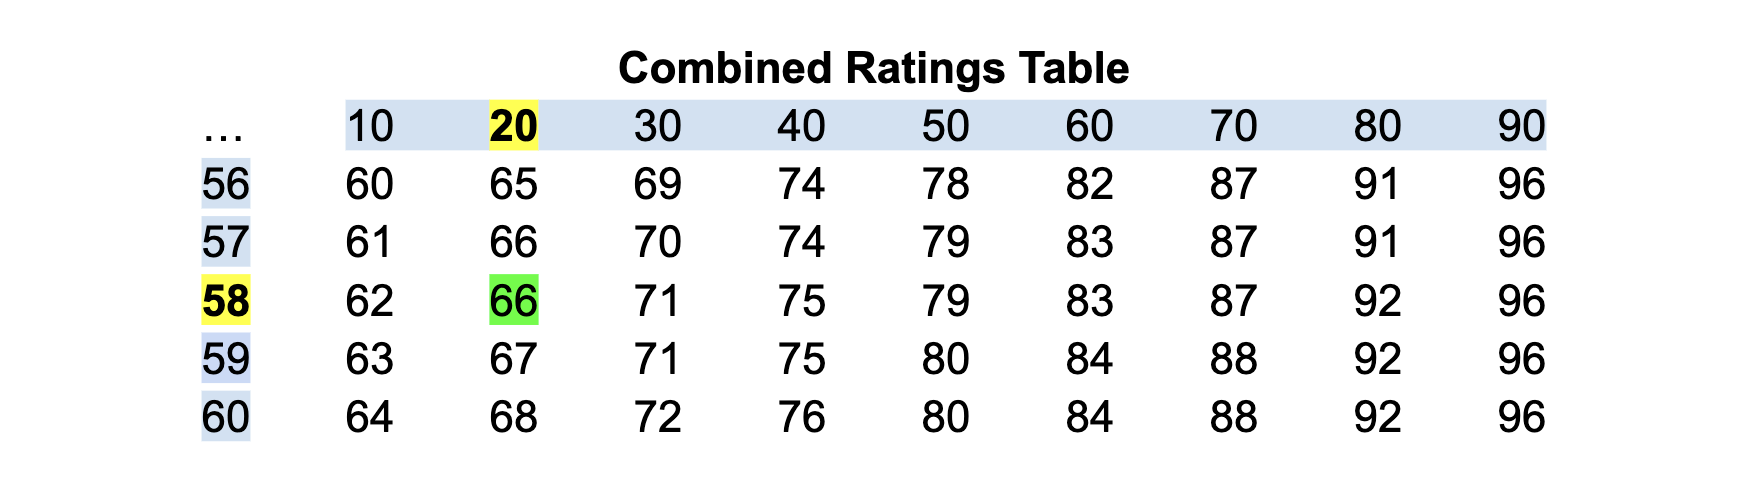 combined ratings table